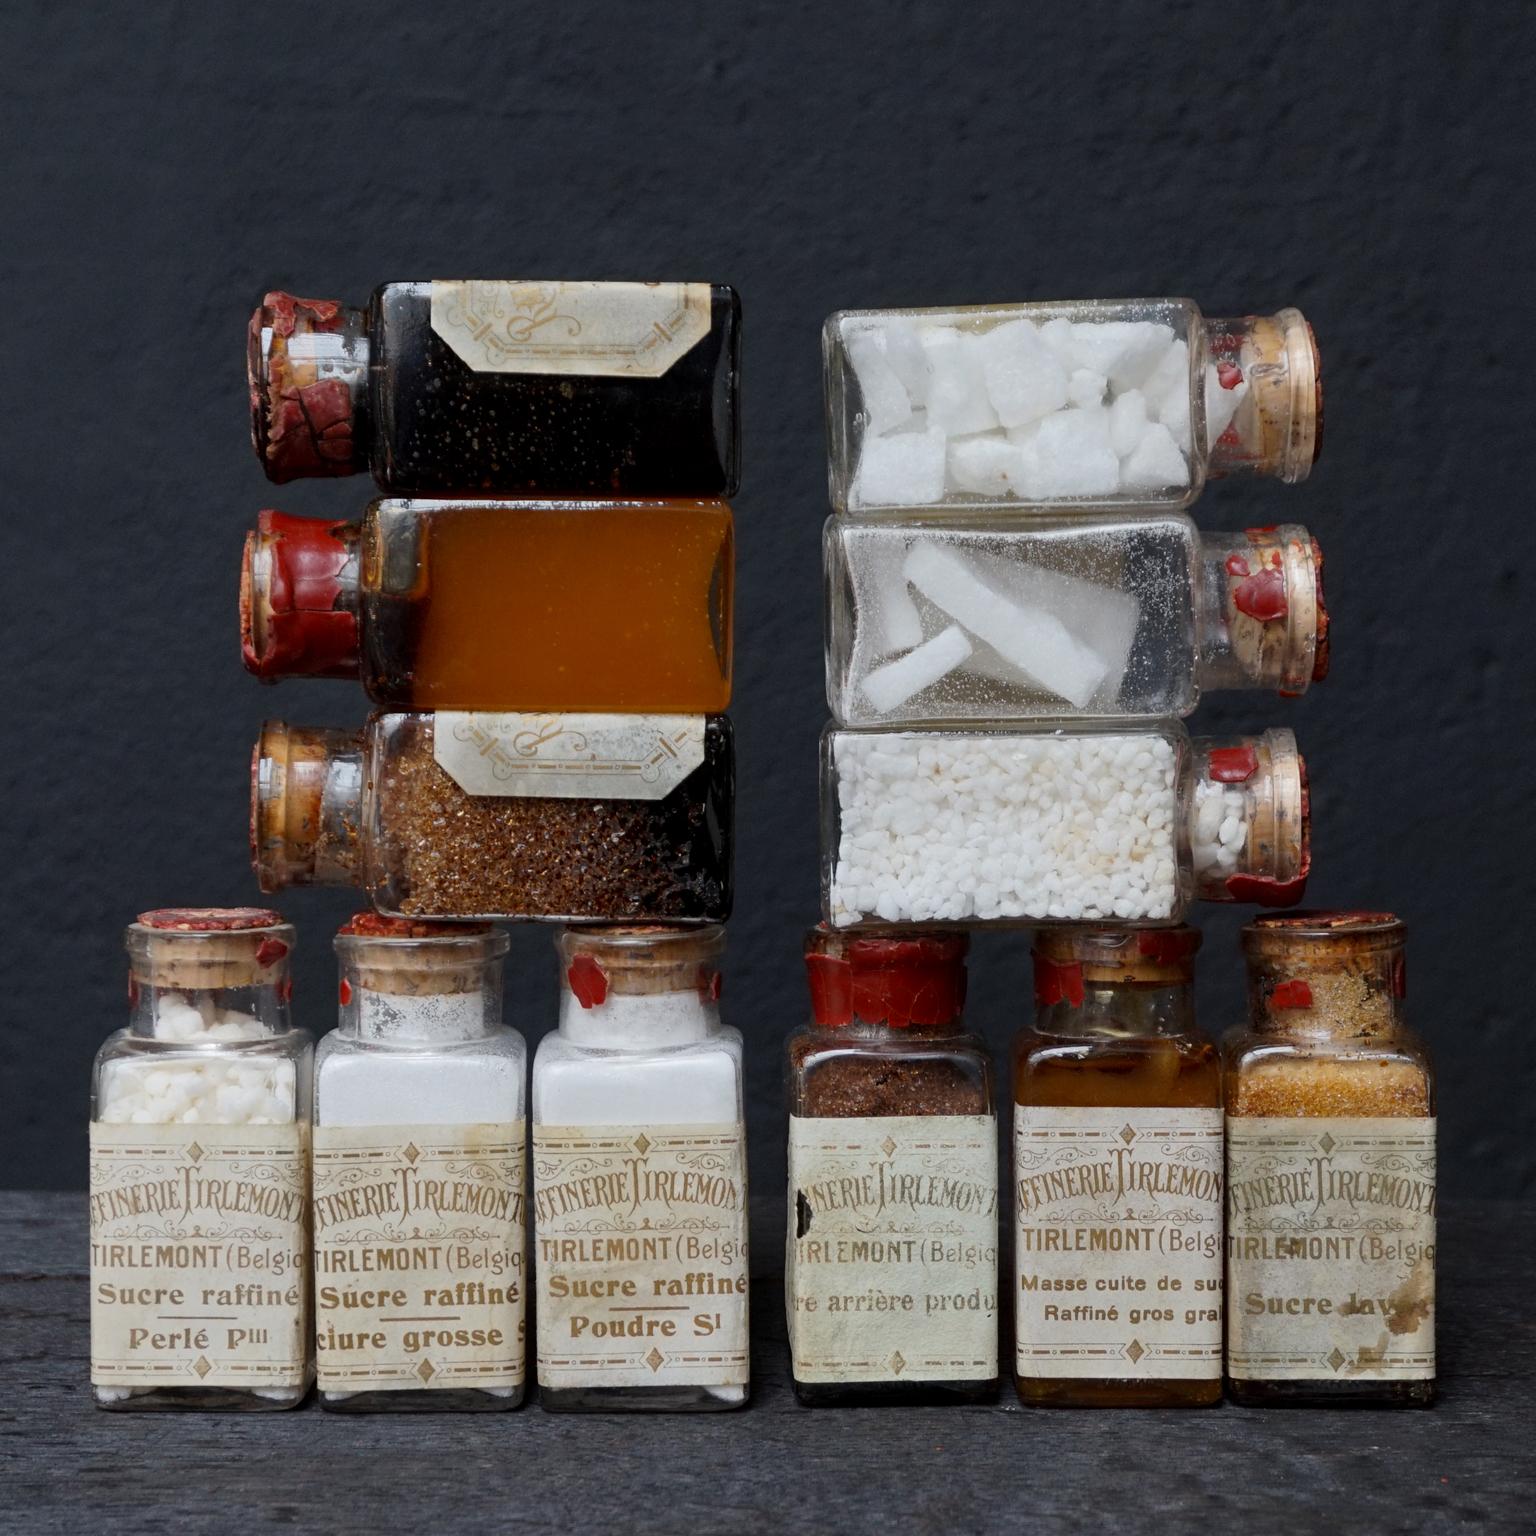 An early 20th century selection of 18 glass vials sugar samples, filled with different forms and stages of sugar. The glass containers are closed with cork stoppers and sealed with seal-wax stamped with the text: 